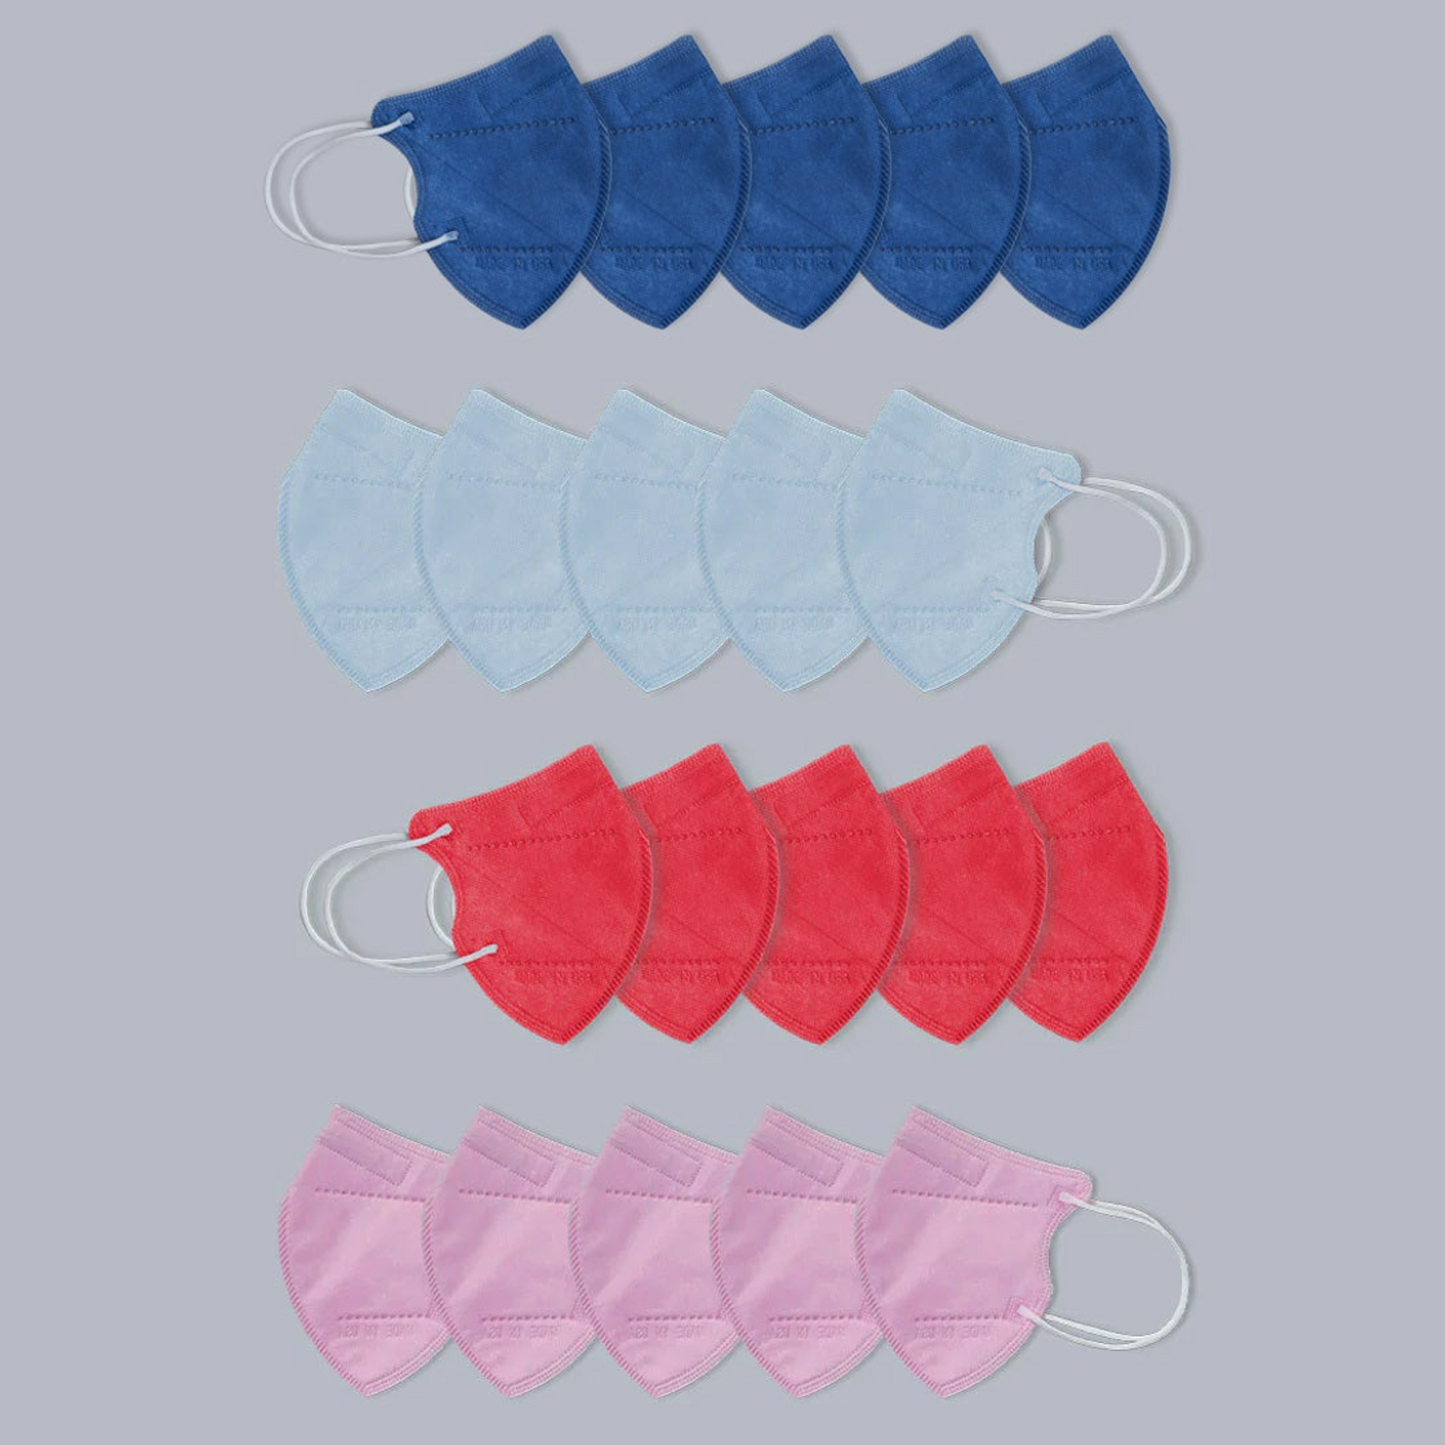 Kids’ Masks with KN95 Protection